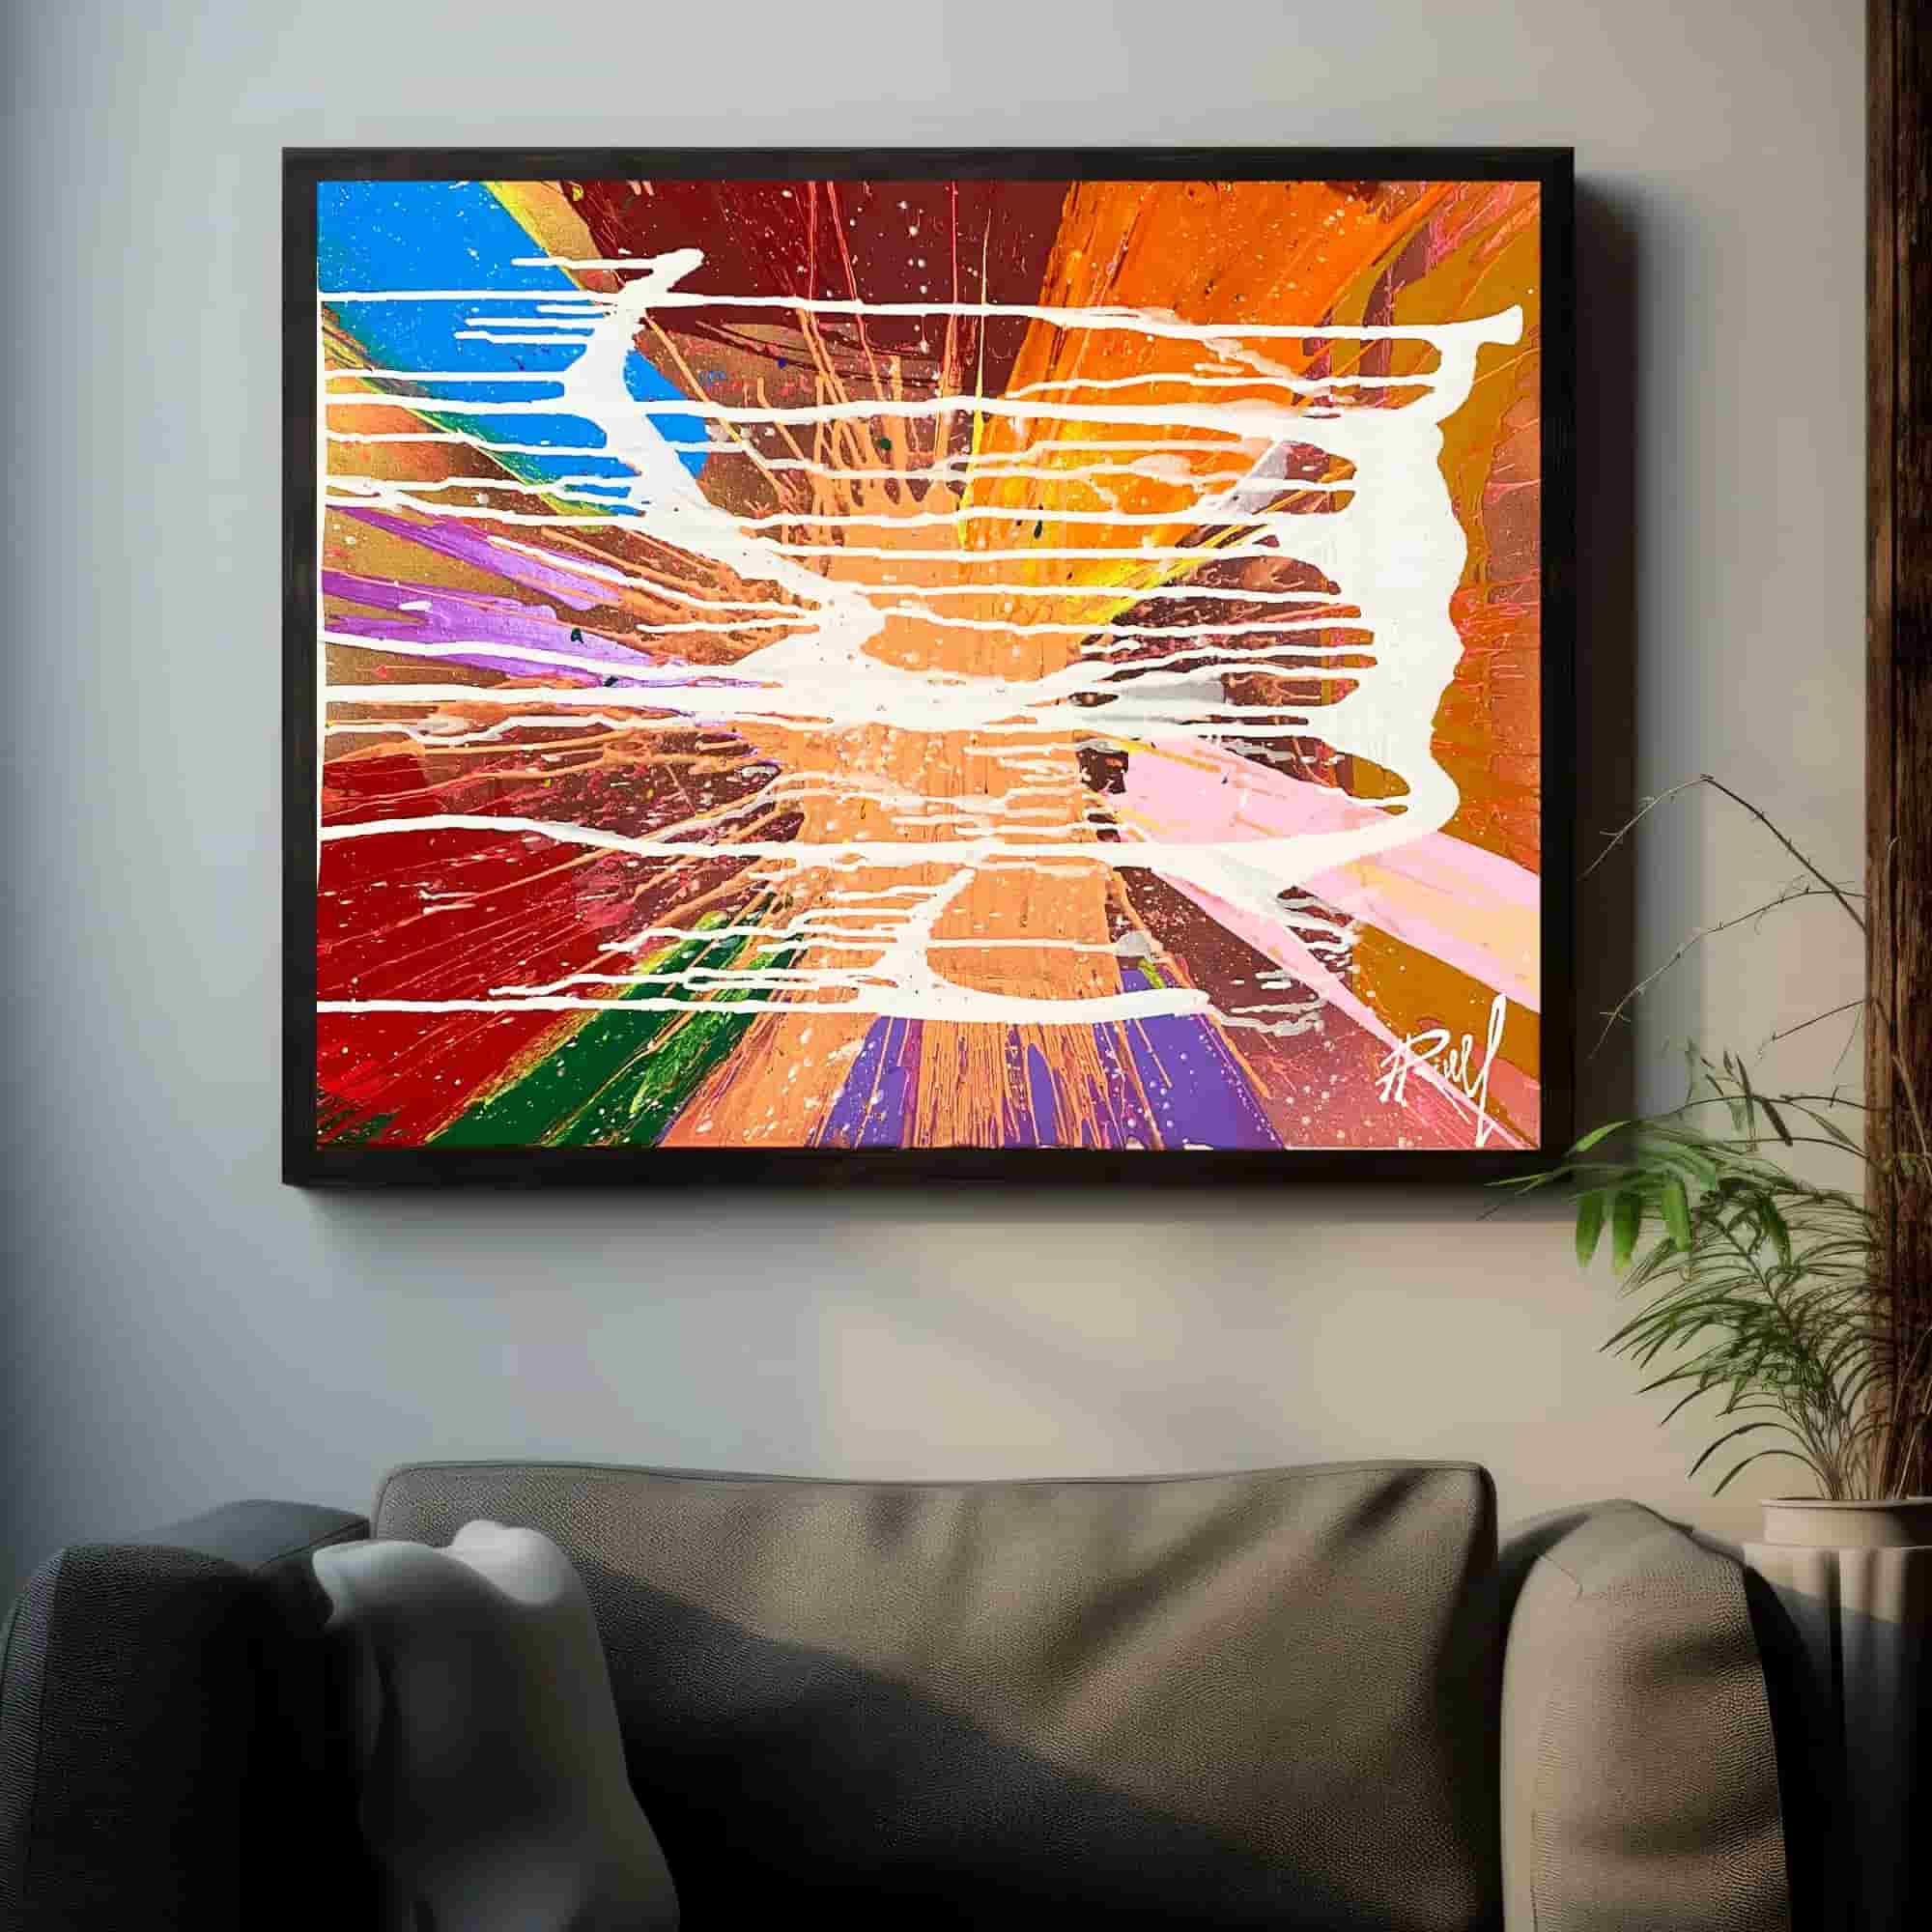 Living room decor accentuated by a spin art canvas painting using acrylic paints, a brilliant manifestation of painting style in the full spectrum of daylight.